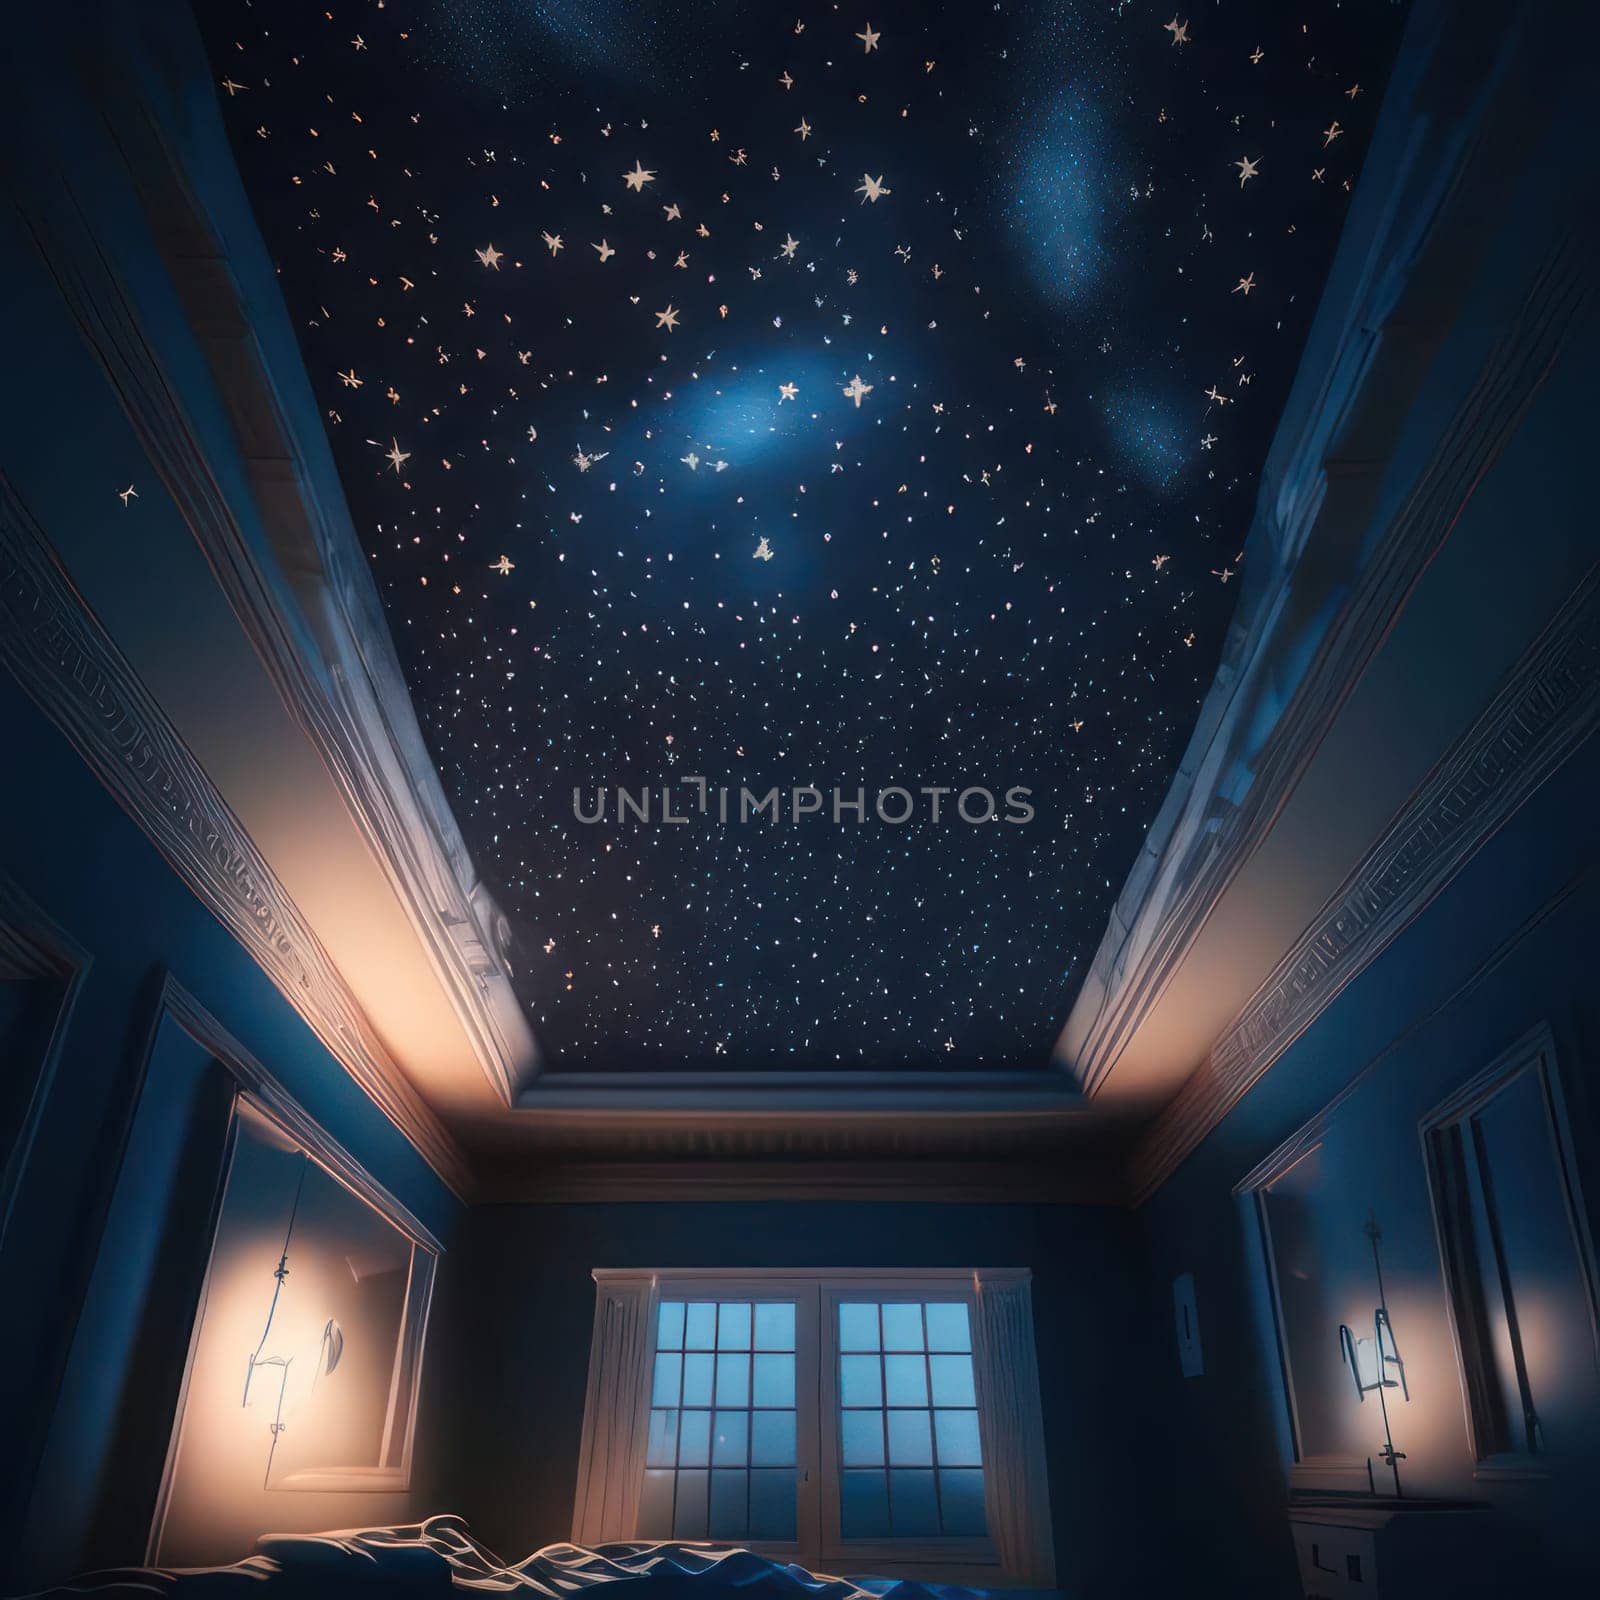 Stars on the ceiling of the room. Image created by AI